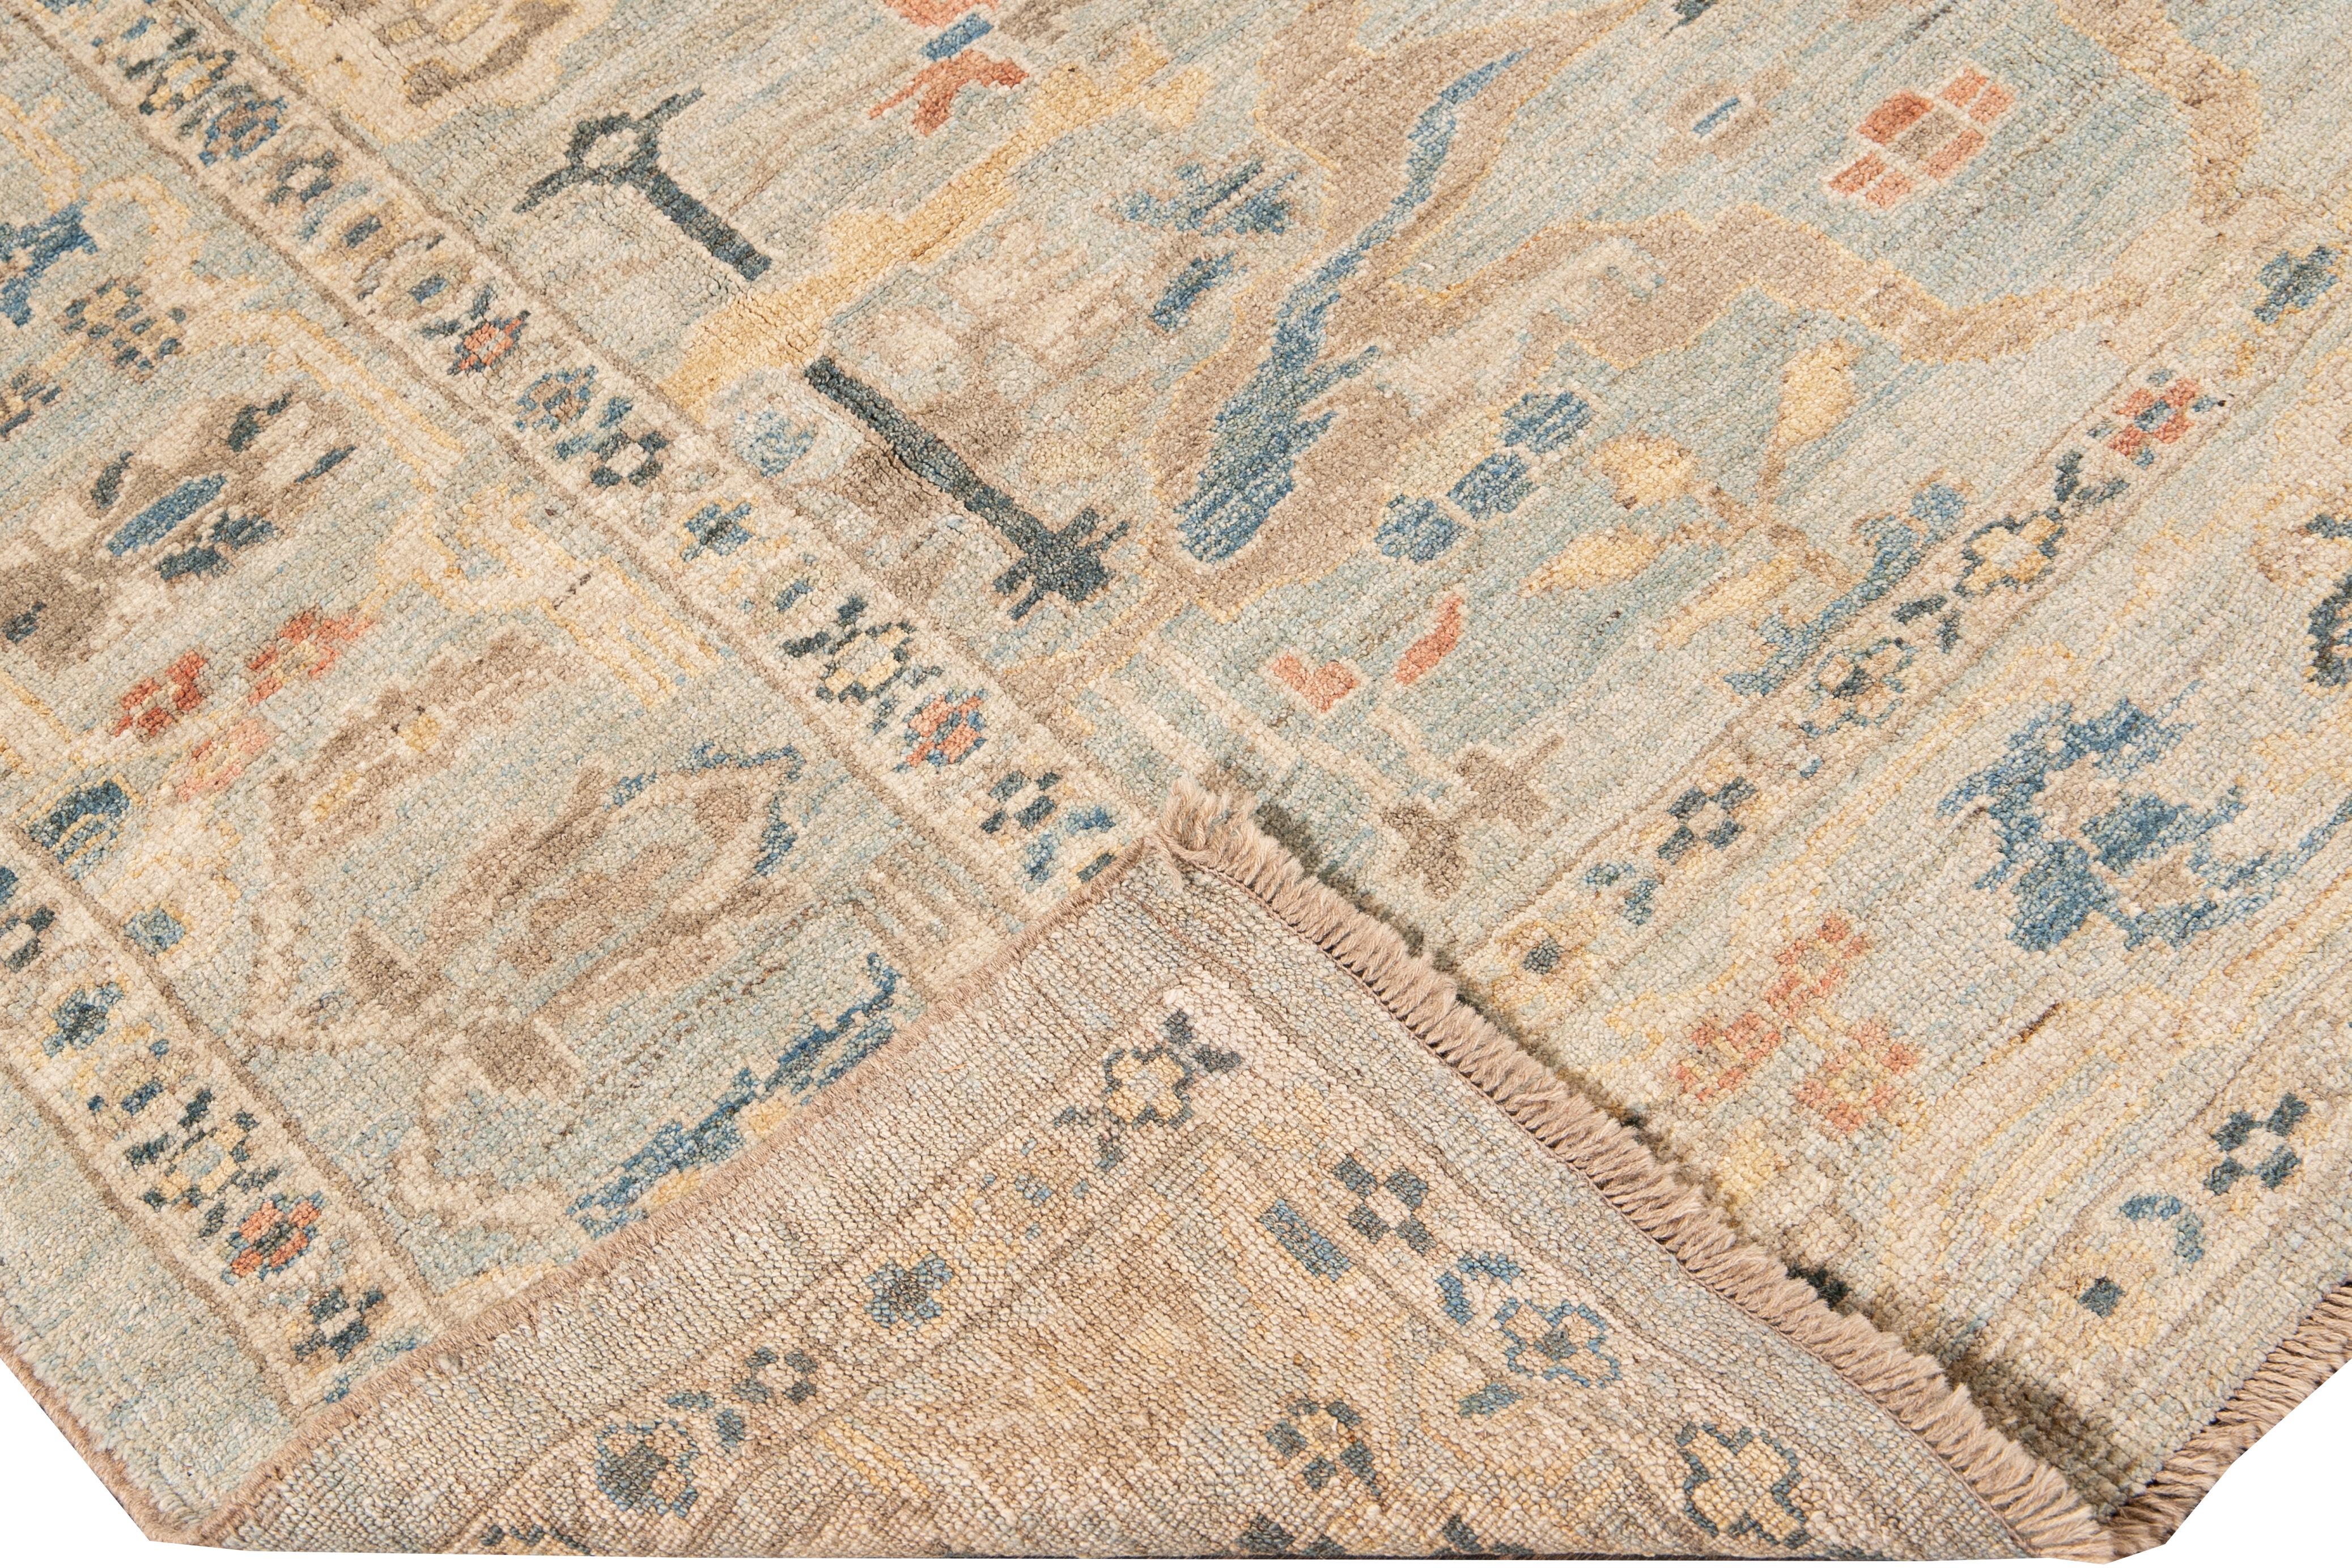 Beautiful modern Sultanabad hand-knotted wool rug with a blue field. This Sultanabad rug has beige, yellow, green, and orange accents in a gorgeous all-over Classic geometric floral design.

This rug measures: 7' x 9'. 

Our rugs are